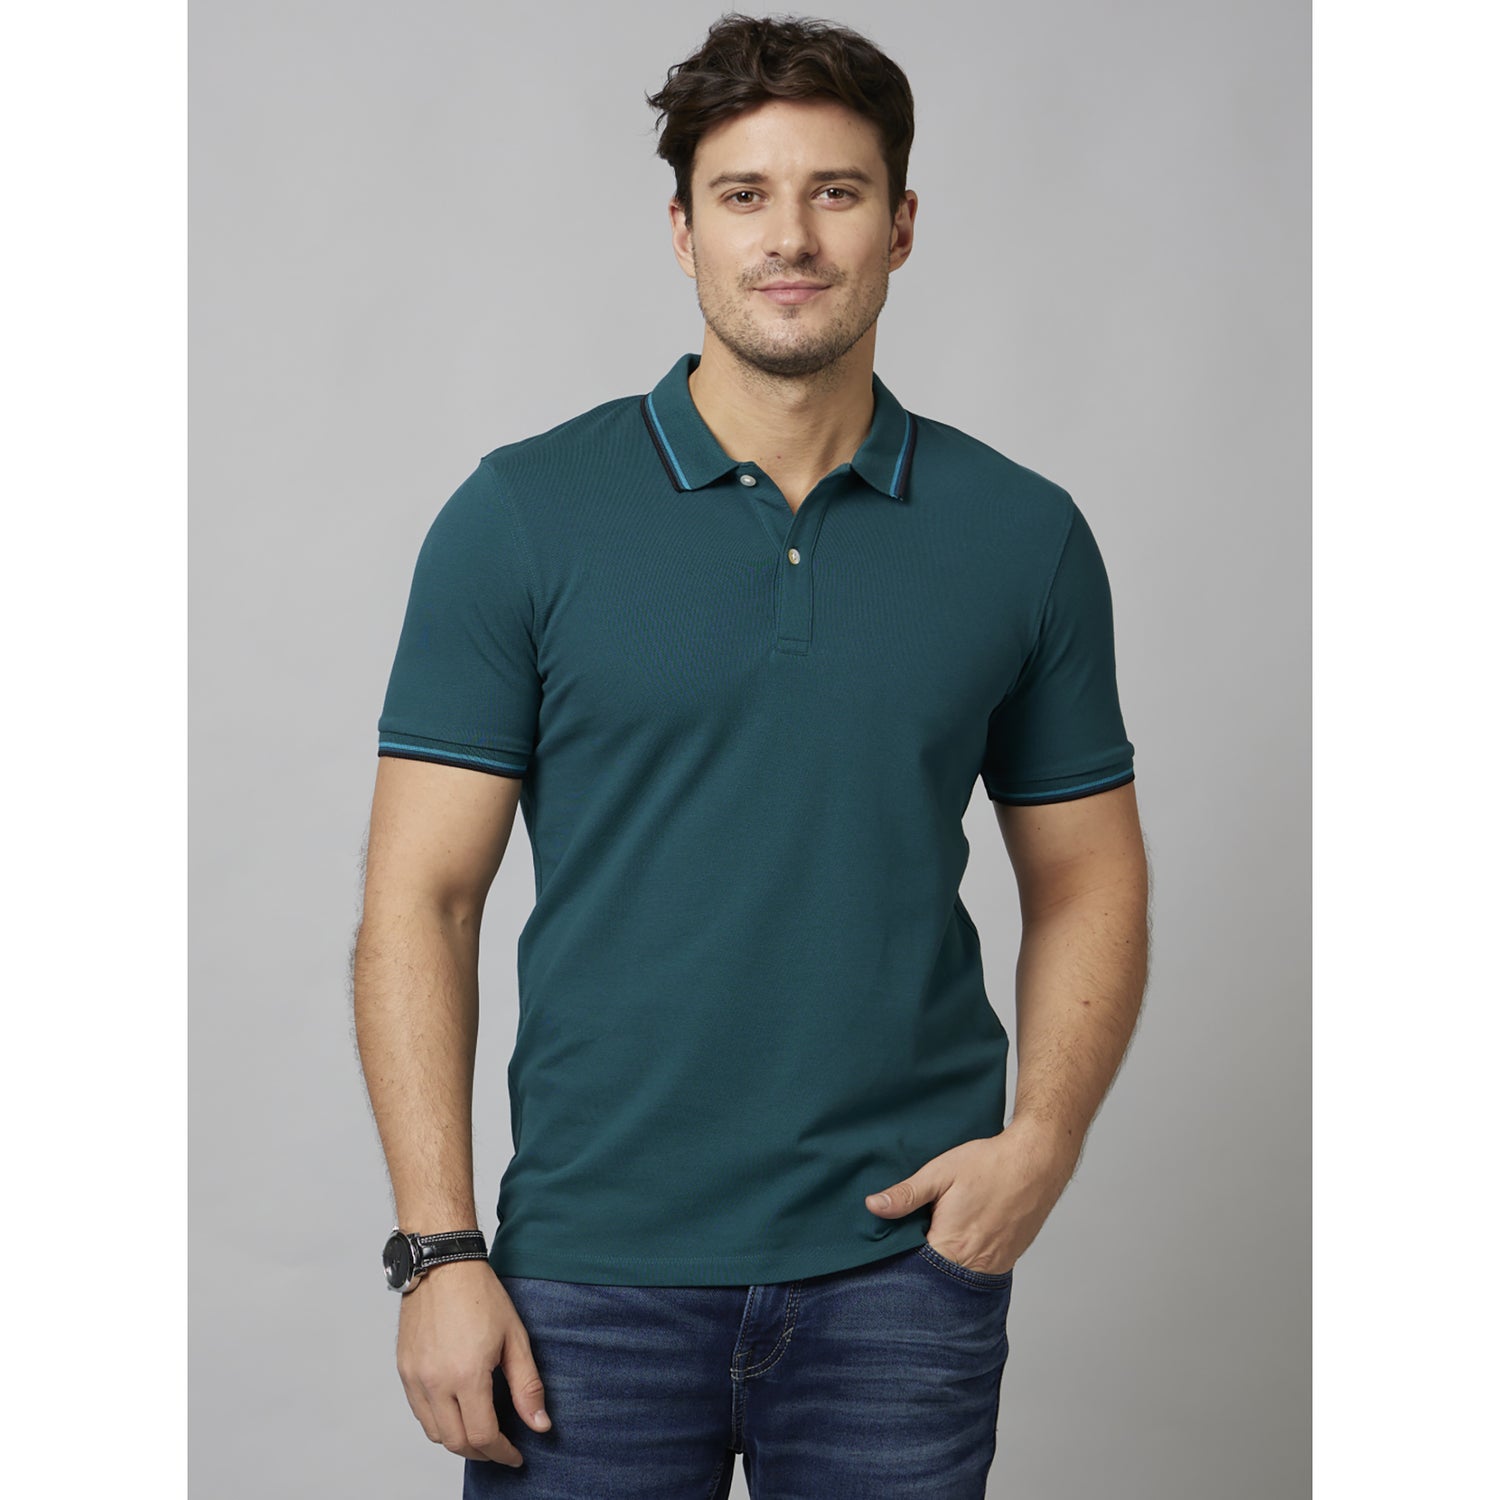 Teal Solid Short Sleeve Cotton Blend T-Shirts (DECOLRAYEB2)